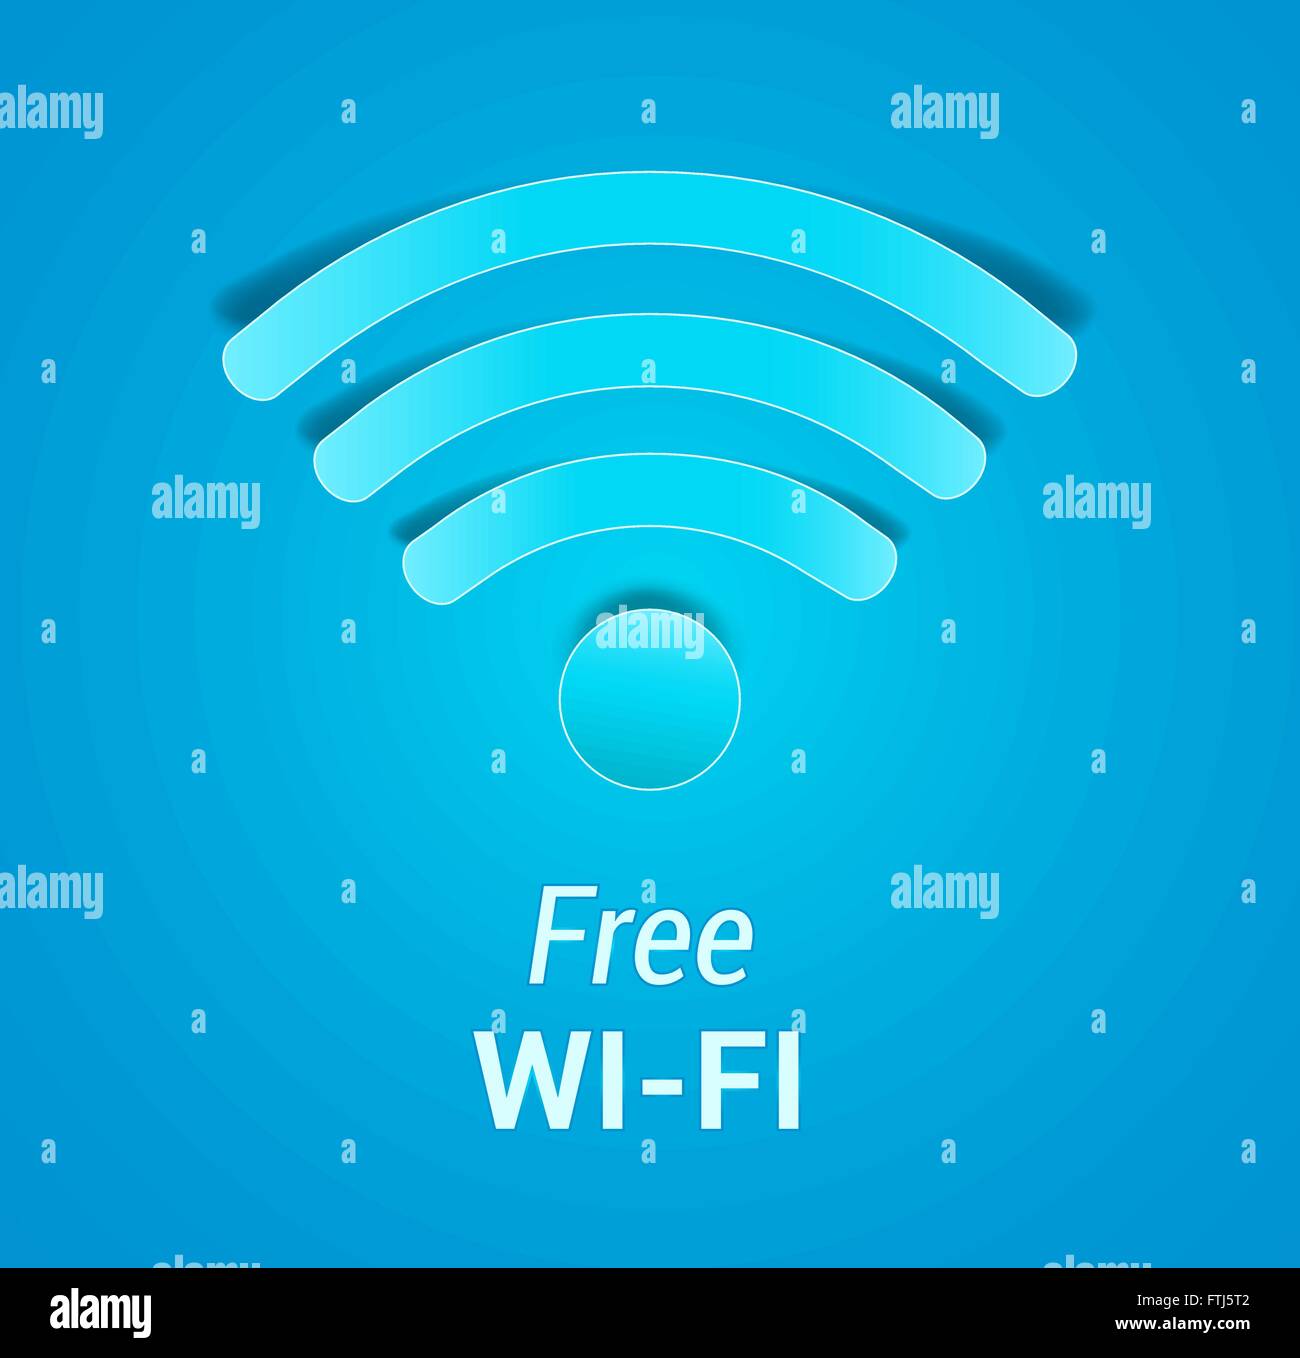 Free Wi-Fi sign on blue background. Wi-Fi icon like paper cut out with shadow. vector Stock Vector